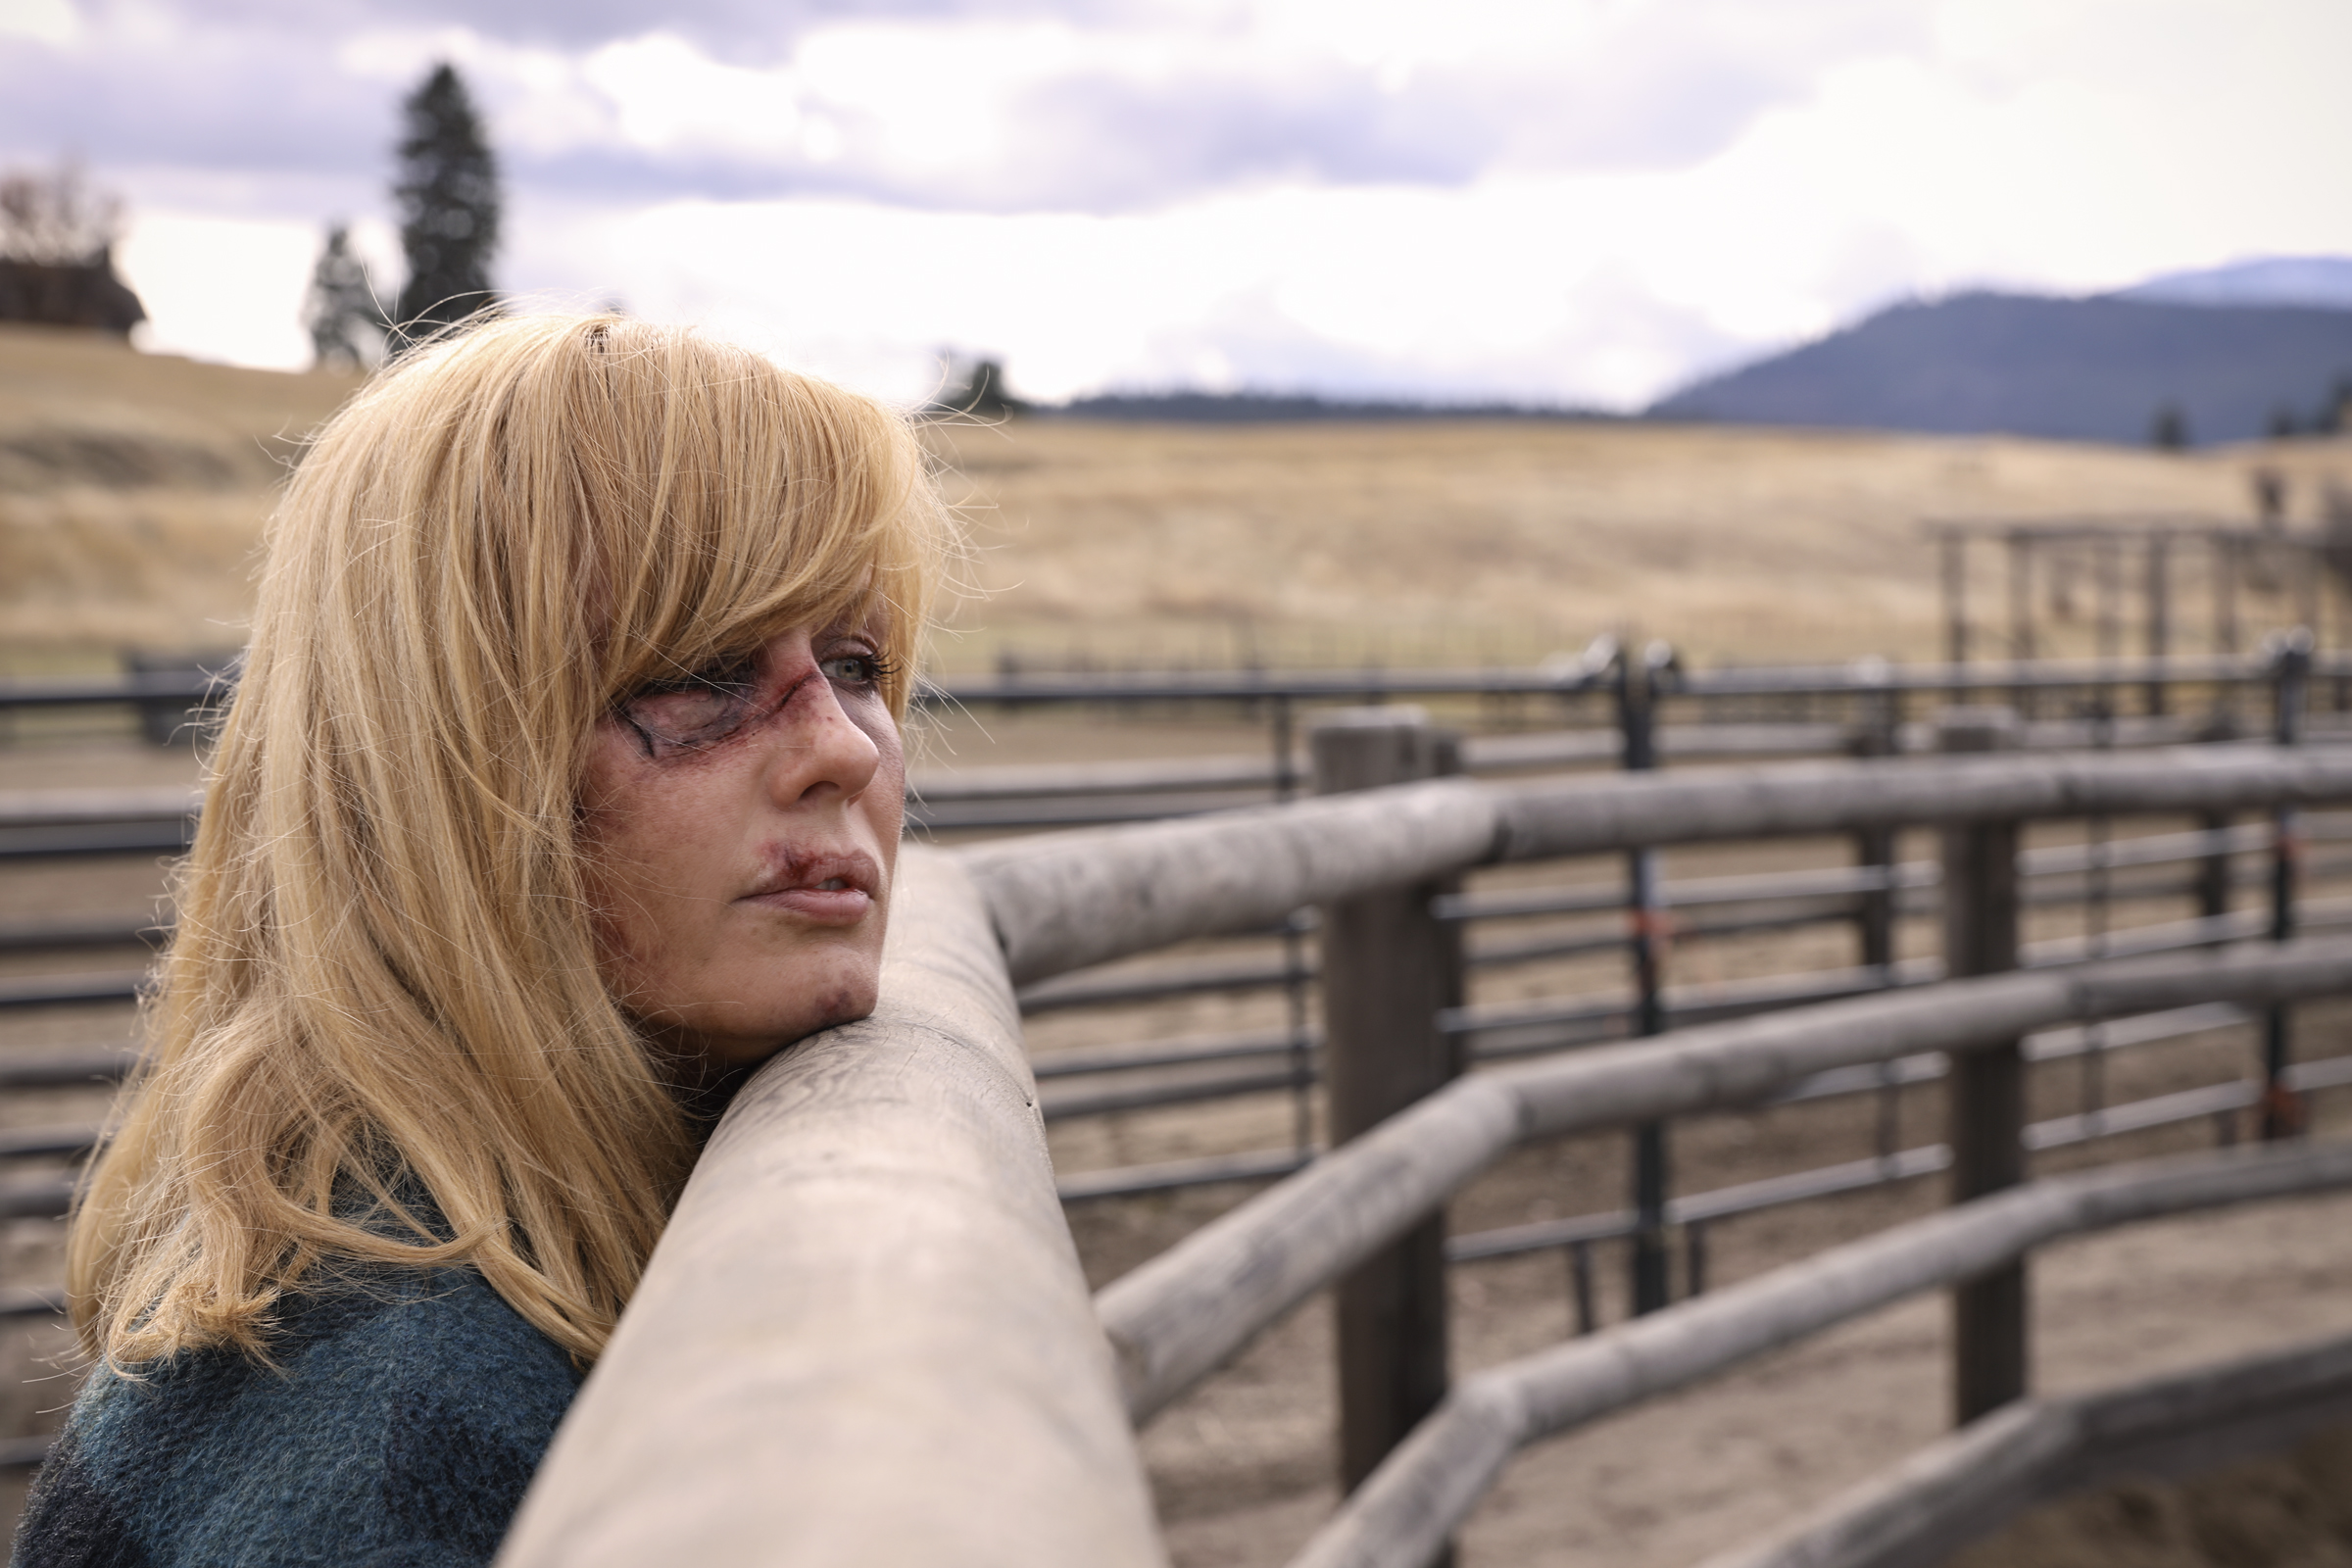 See Photos From 'Yellowstone' Season 2, Episode 8 'Behind Us...